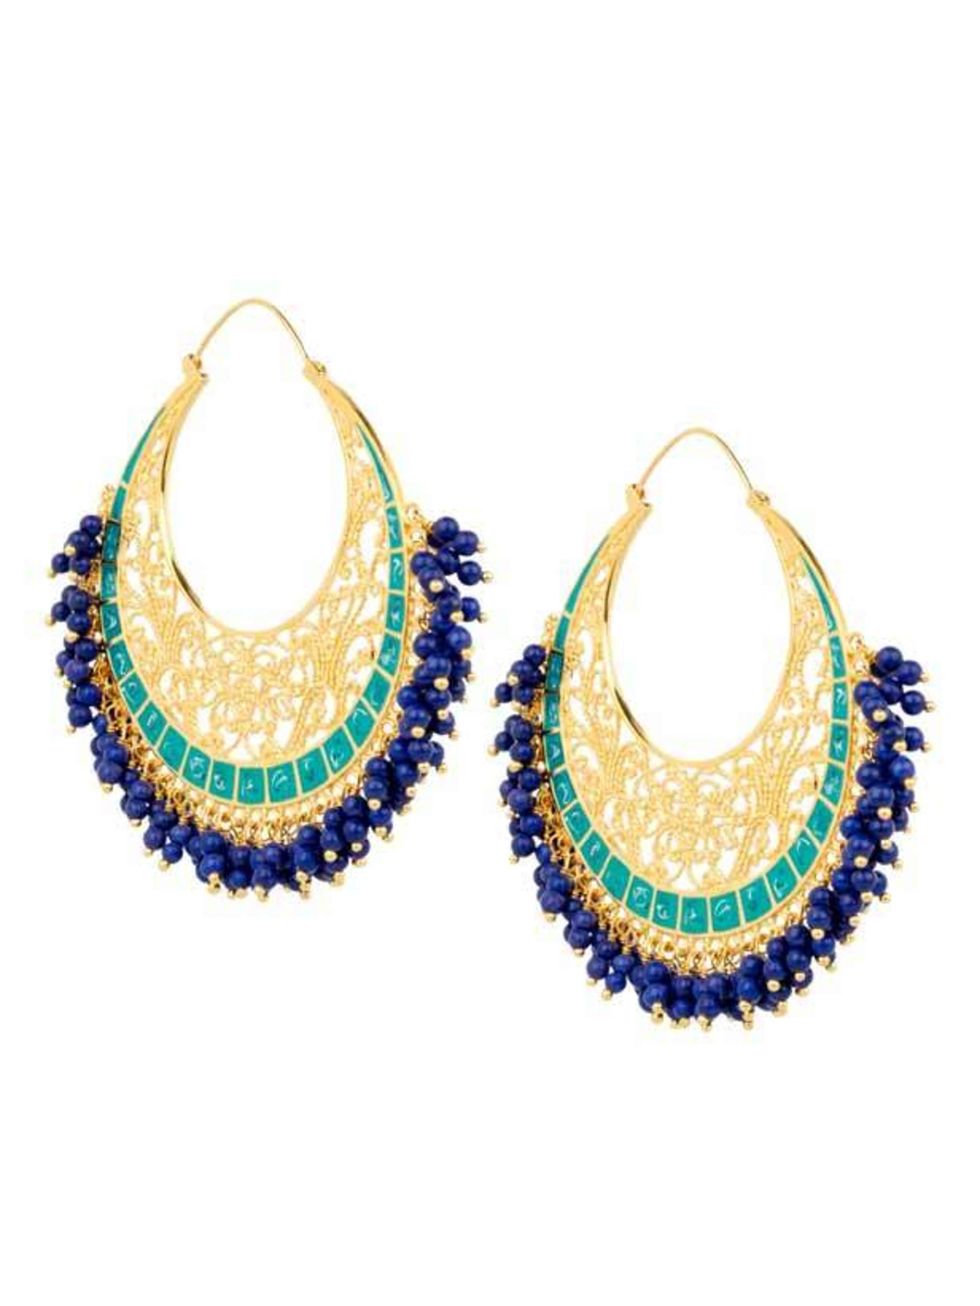 <p>Ishayra Moonbali gold plated earrings, £245, at <a href="http://www.net-a-porter.com/product/80799">Net-a-Porter</a></p>